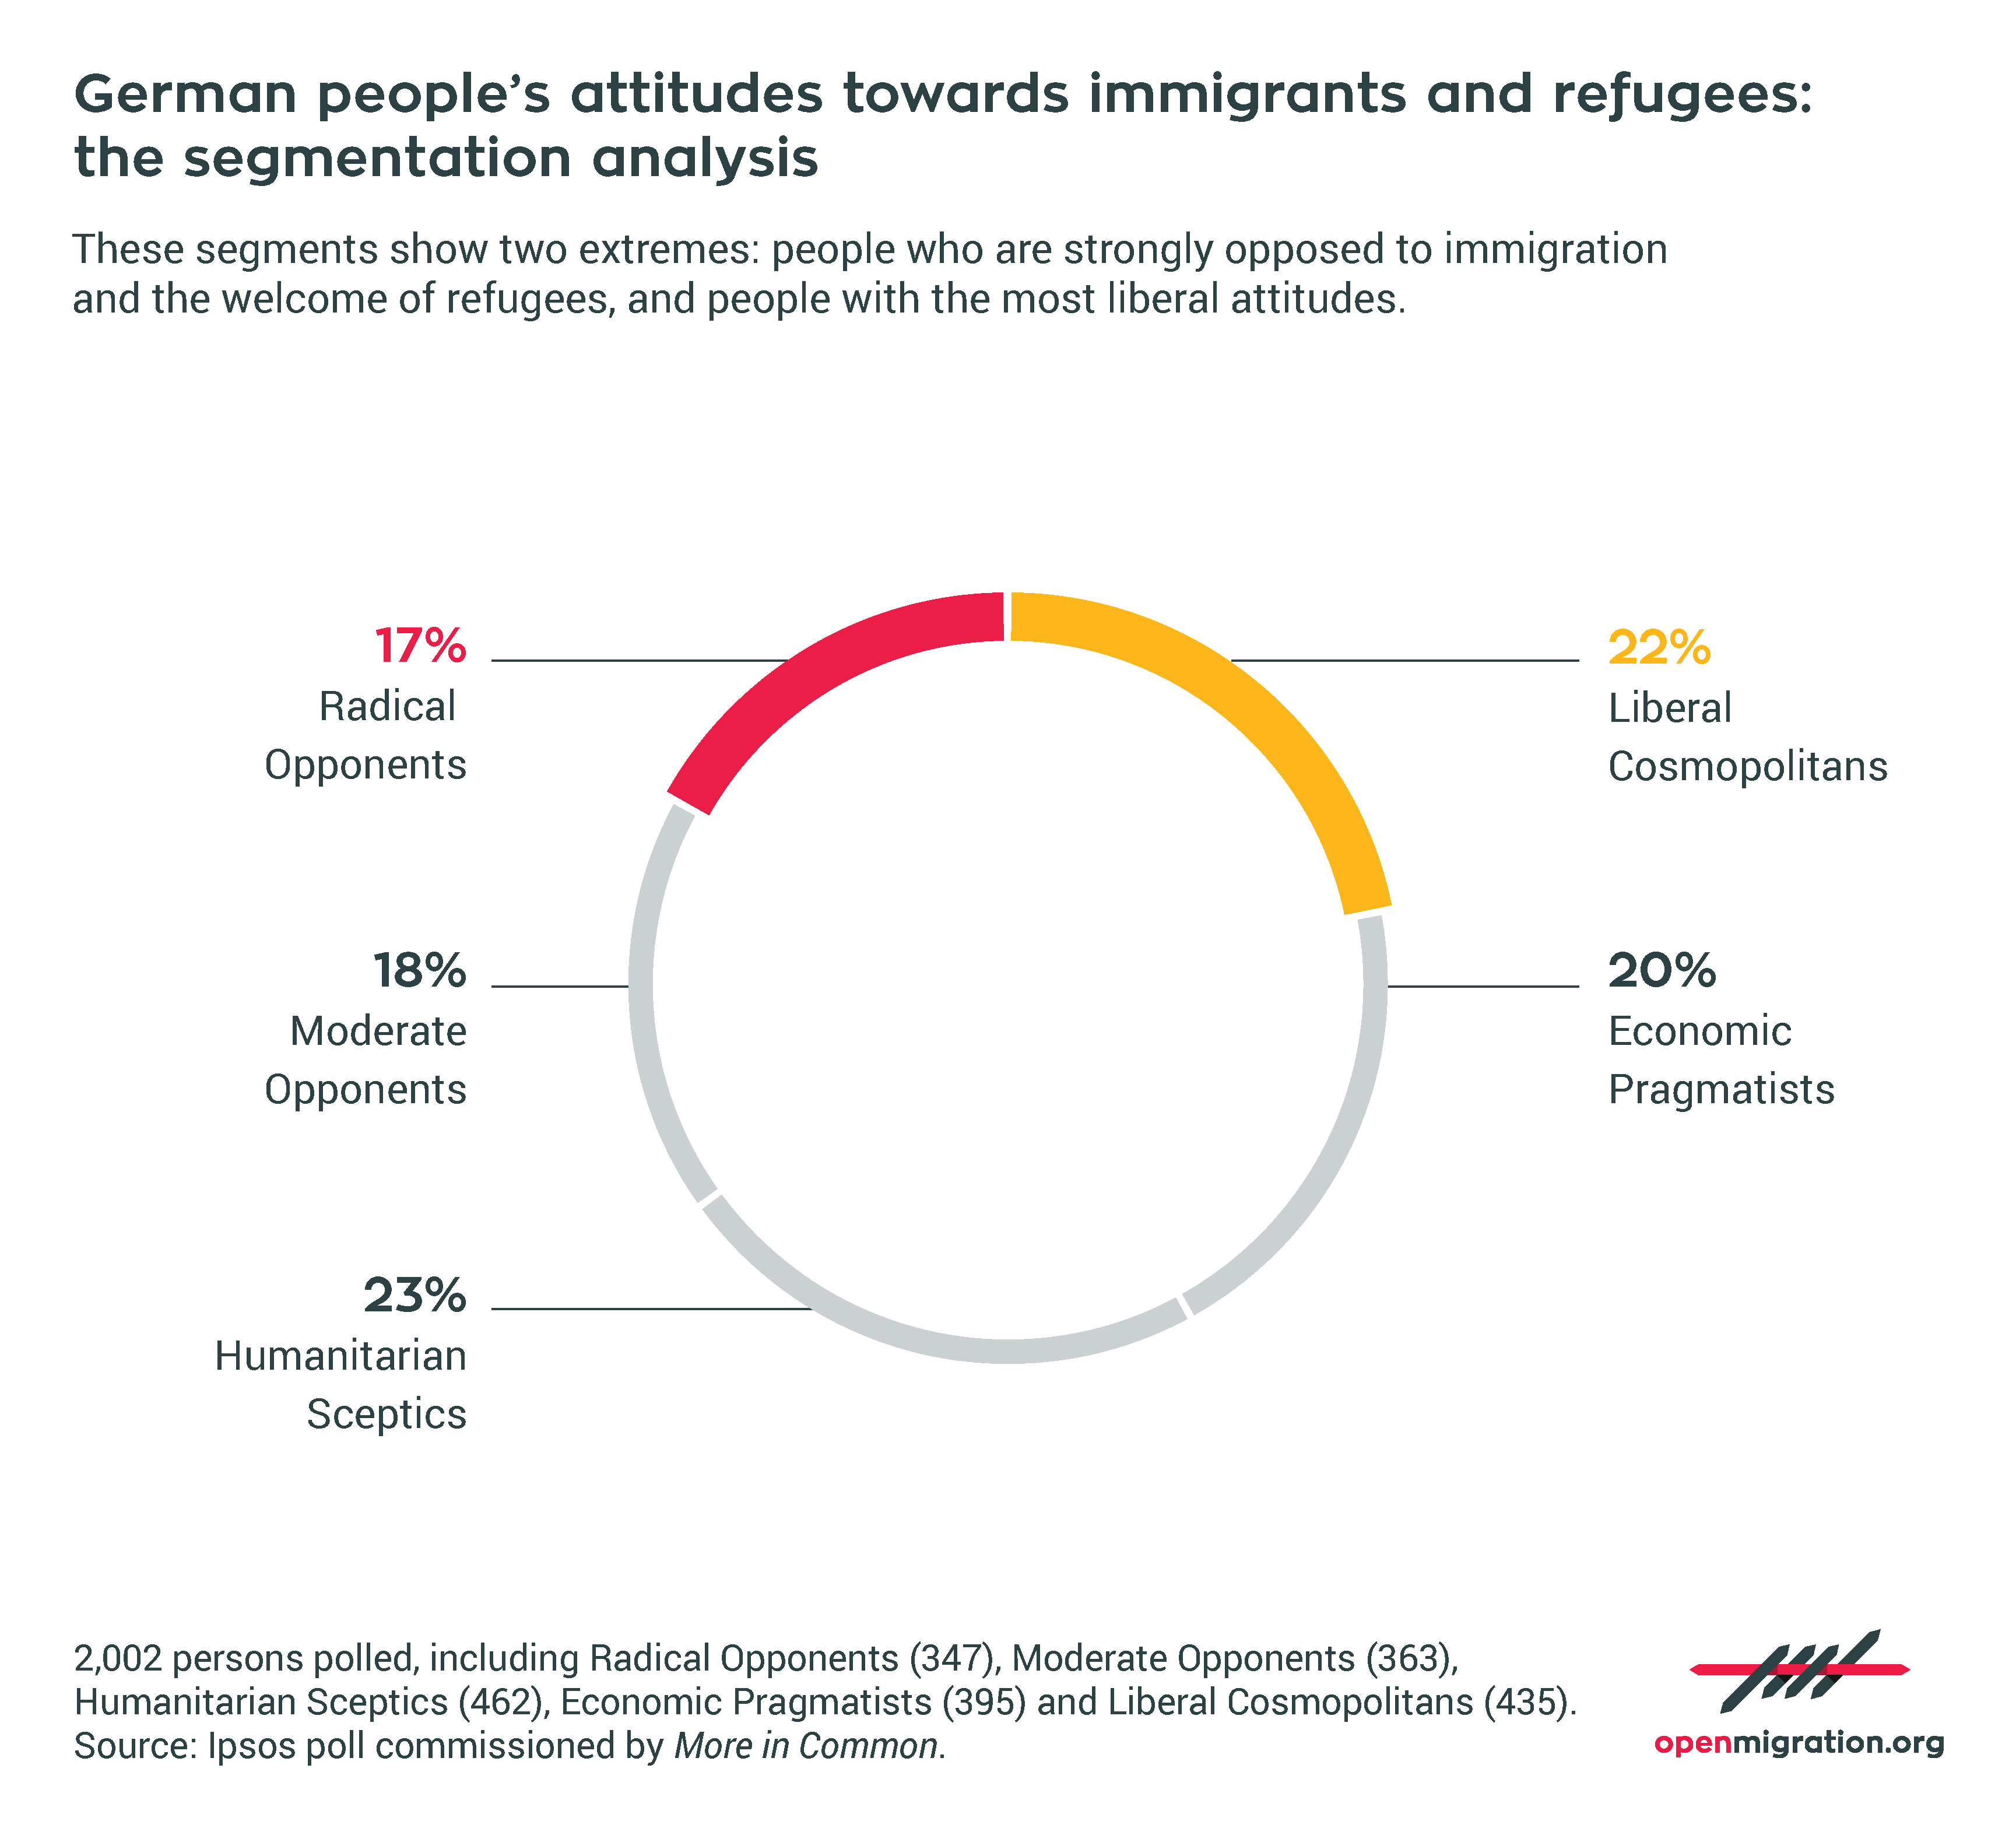 Germany’s public opinion on refugees